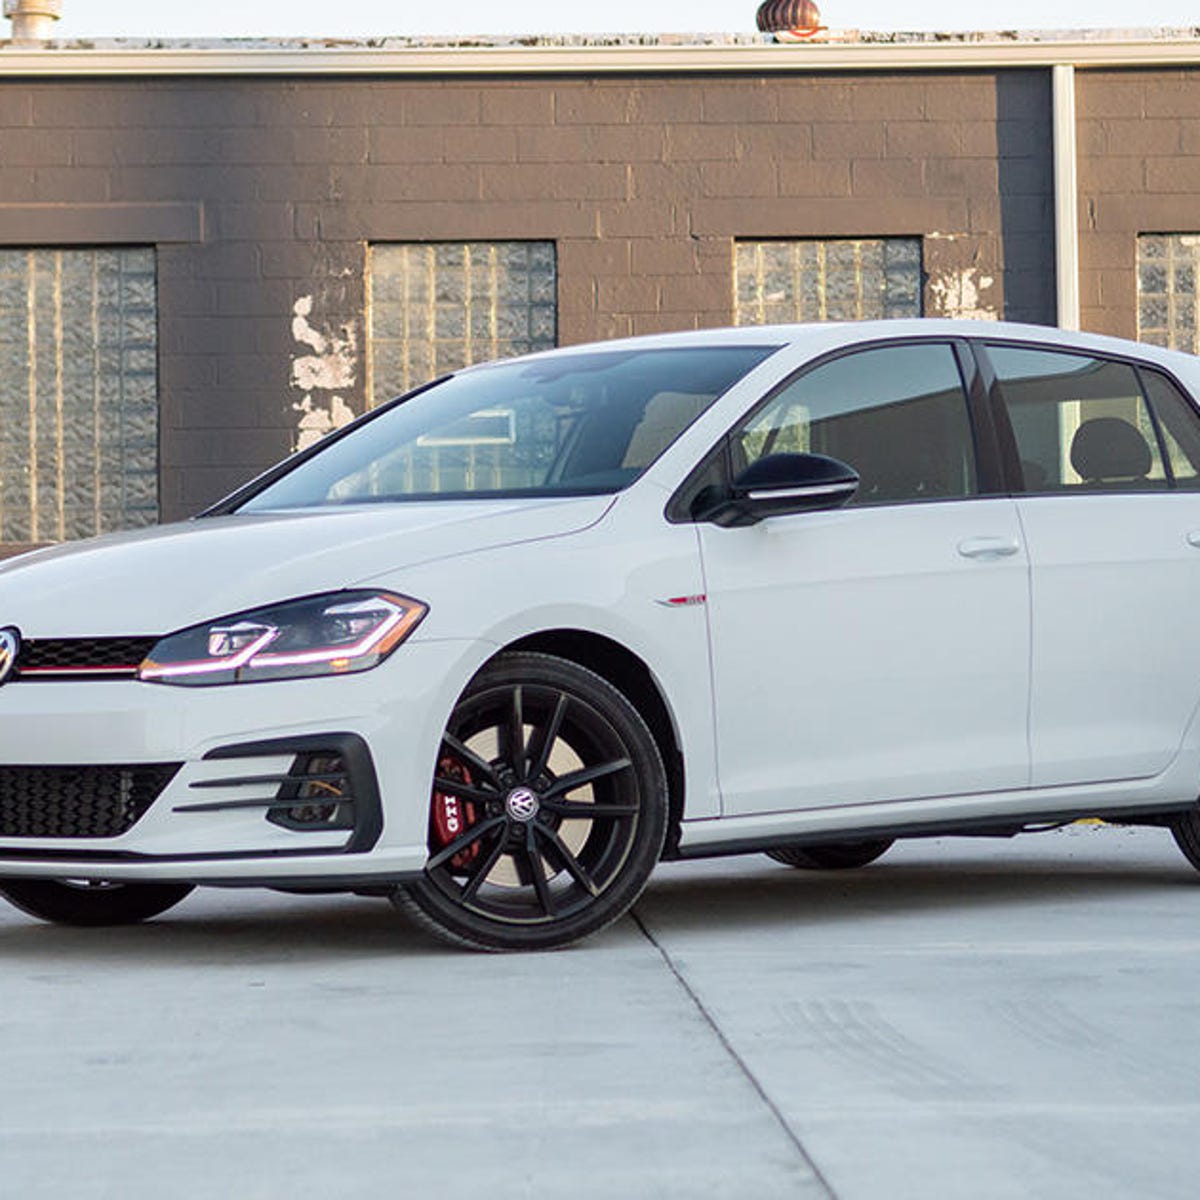 2019 Volkswagen Golf GTI review: The best daily driver gets better - CNET